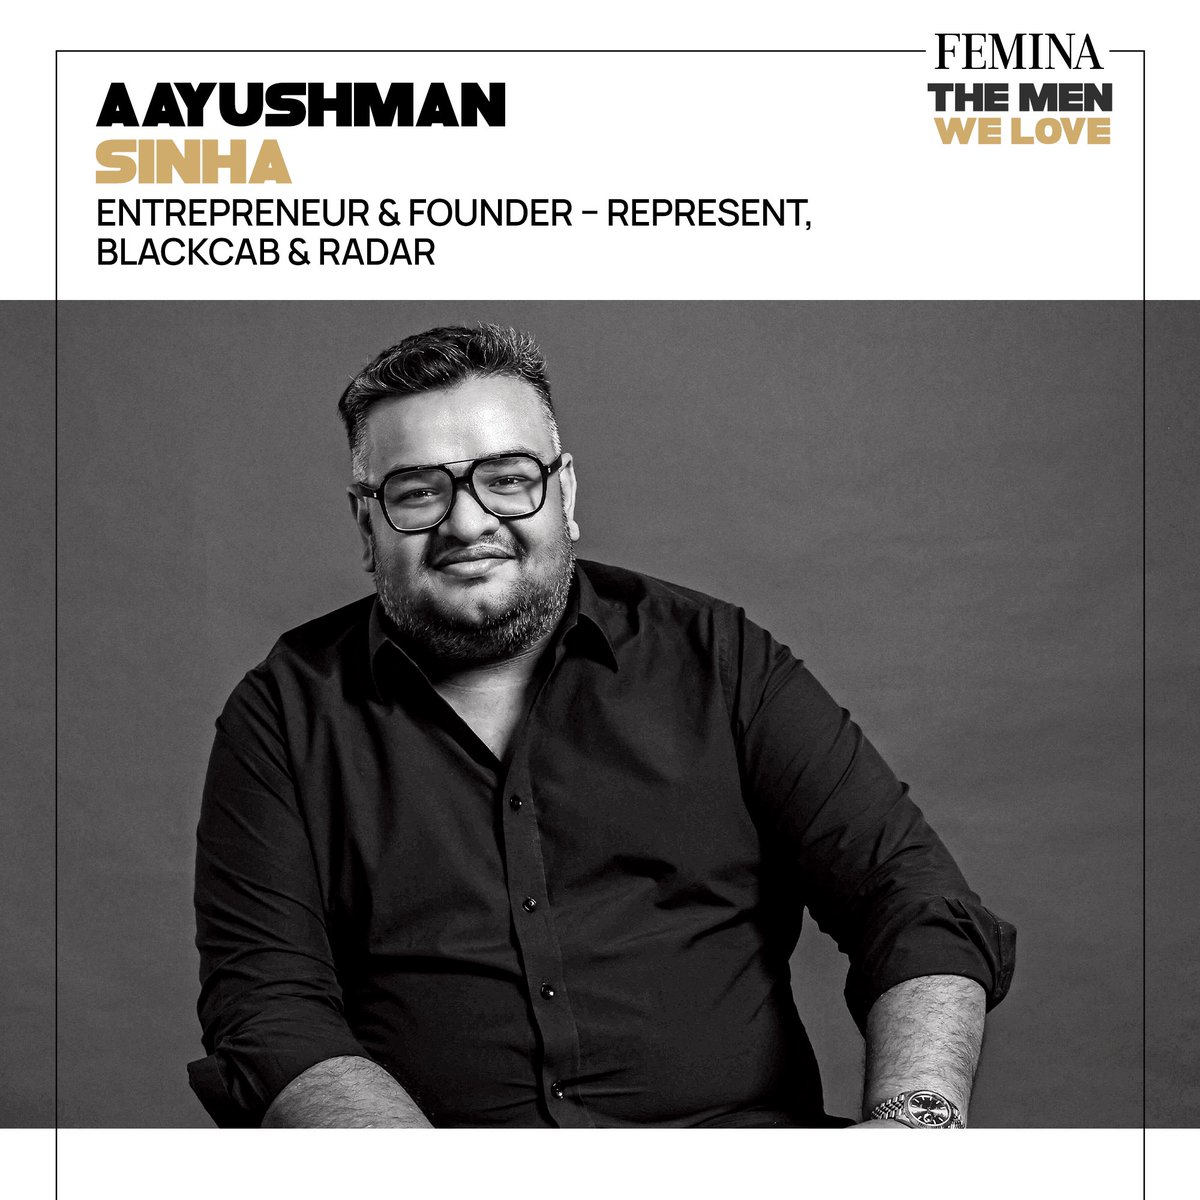 #FeminaMenWeLove: His vision is to ‘build pop culture in India’, and Aayushman Sinha is well on his way to doing just that. The 29-year-old also actively invests in start-ups through his micro-VC fund Patronus and network DotIn. @aayushmansinha